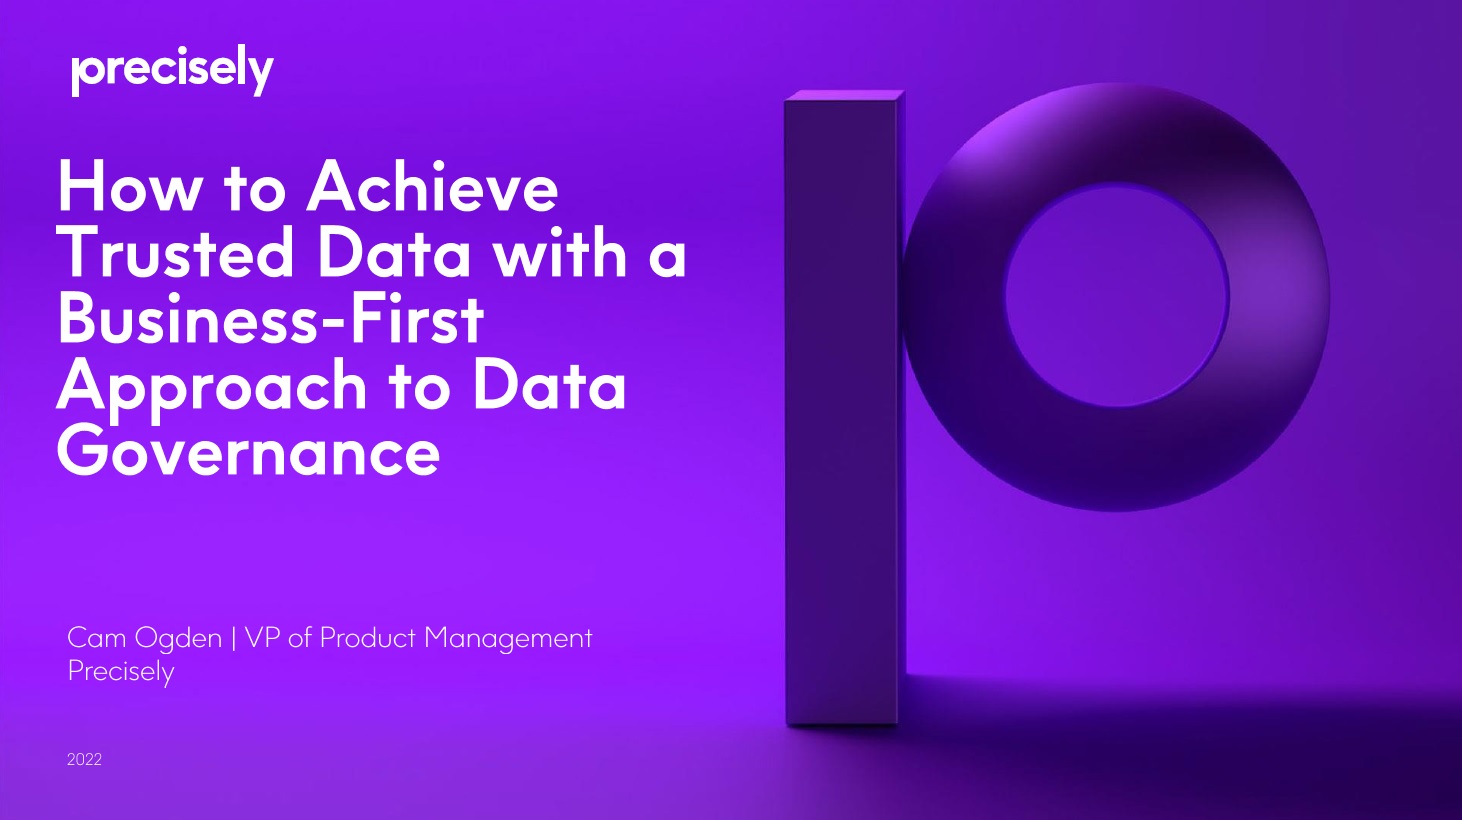 How to Achieve Trusted Data with a Business-First Approach to Data Governance